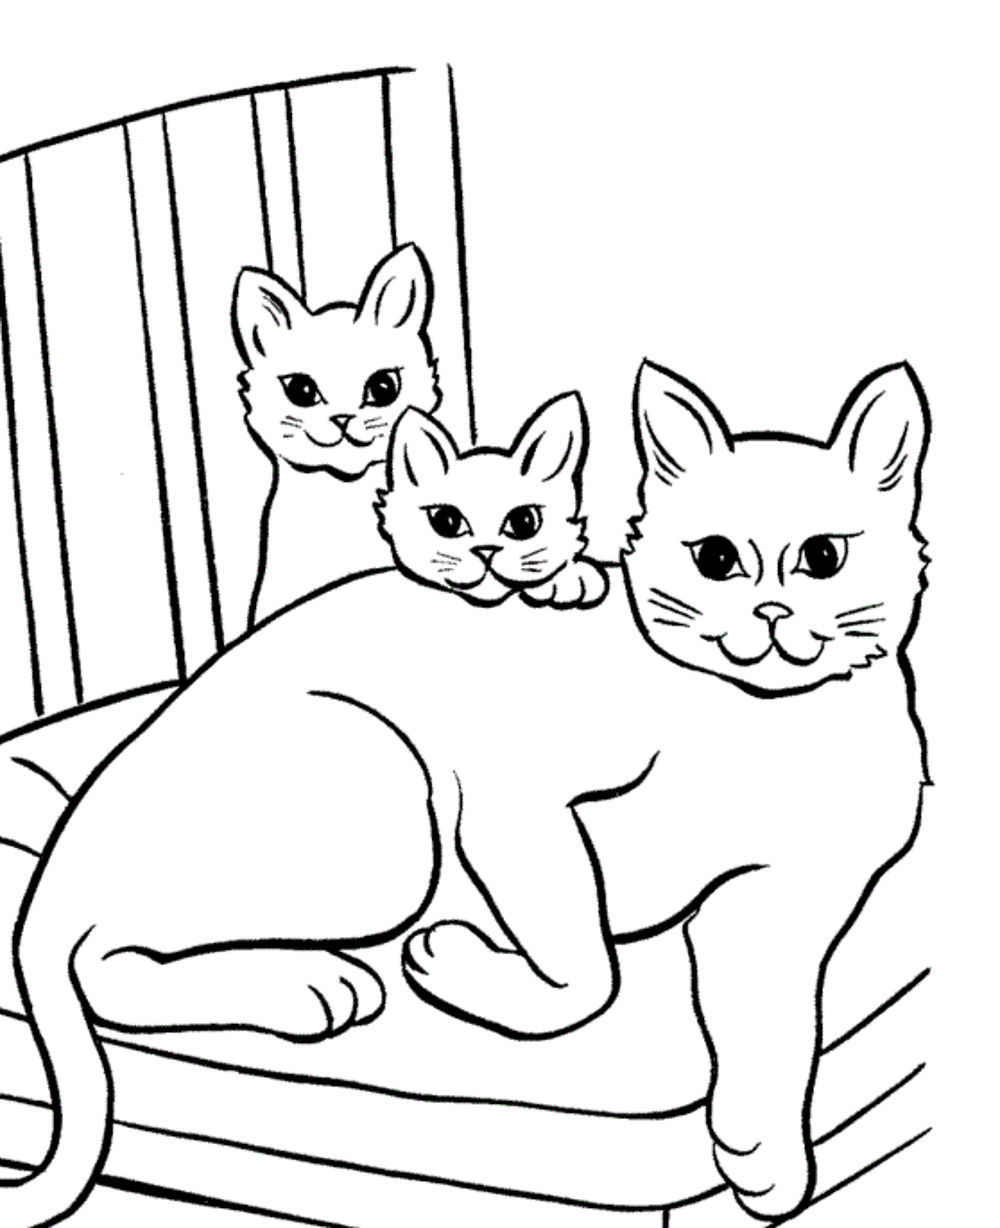 printable-coloring-pages-cat-printable-world-holiday